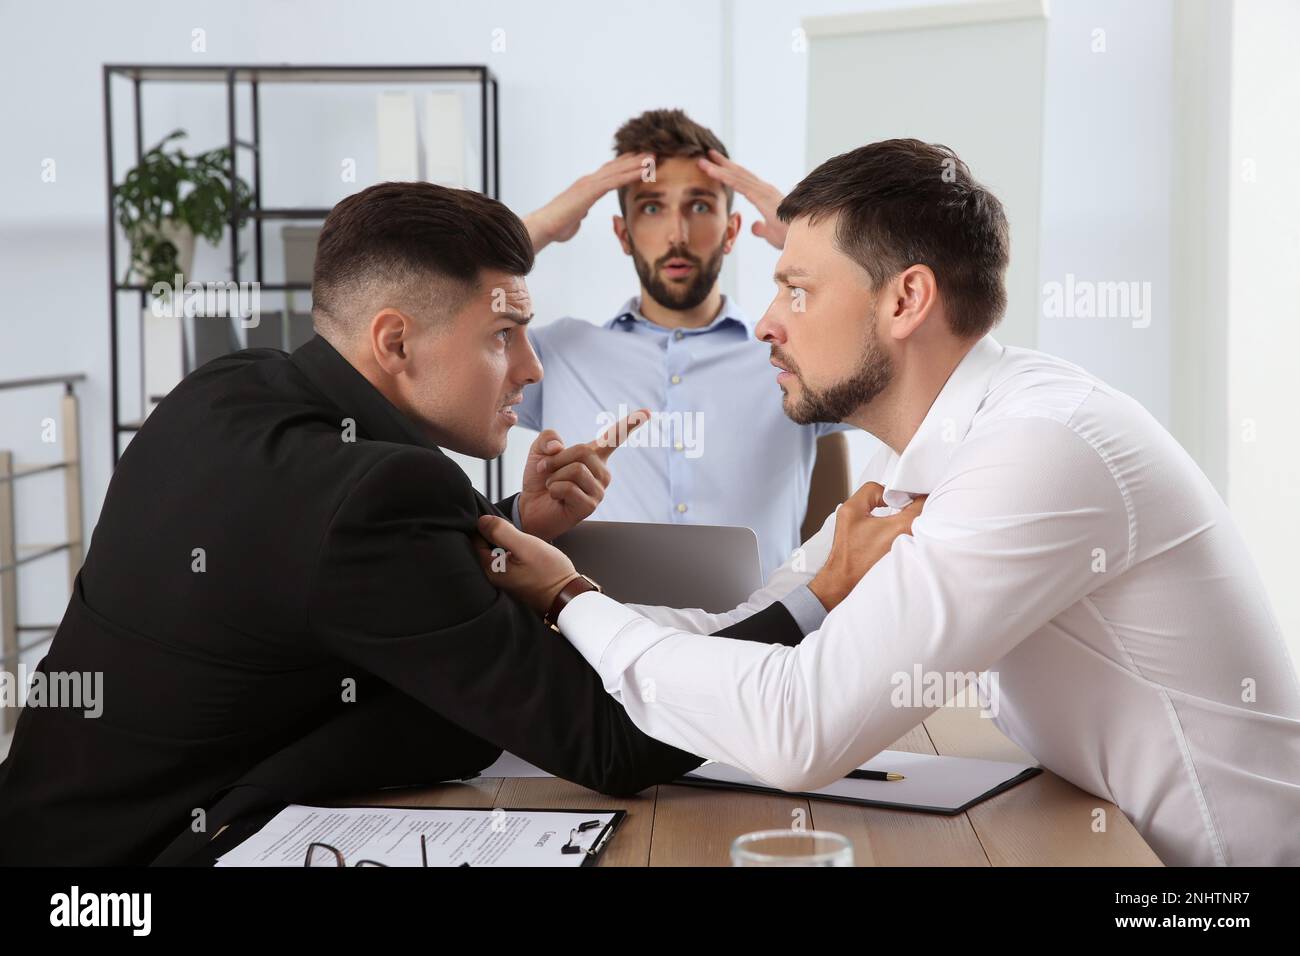 Emotional colleagues fighting in office. Workplace conflict Stock Photo